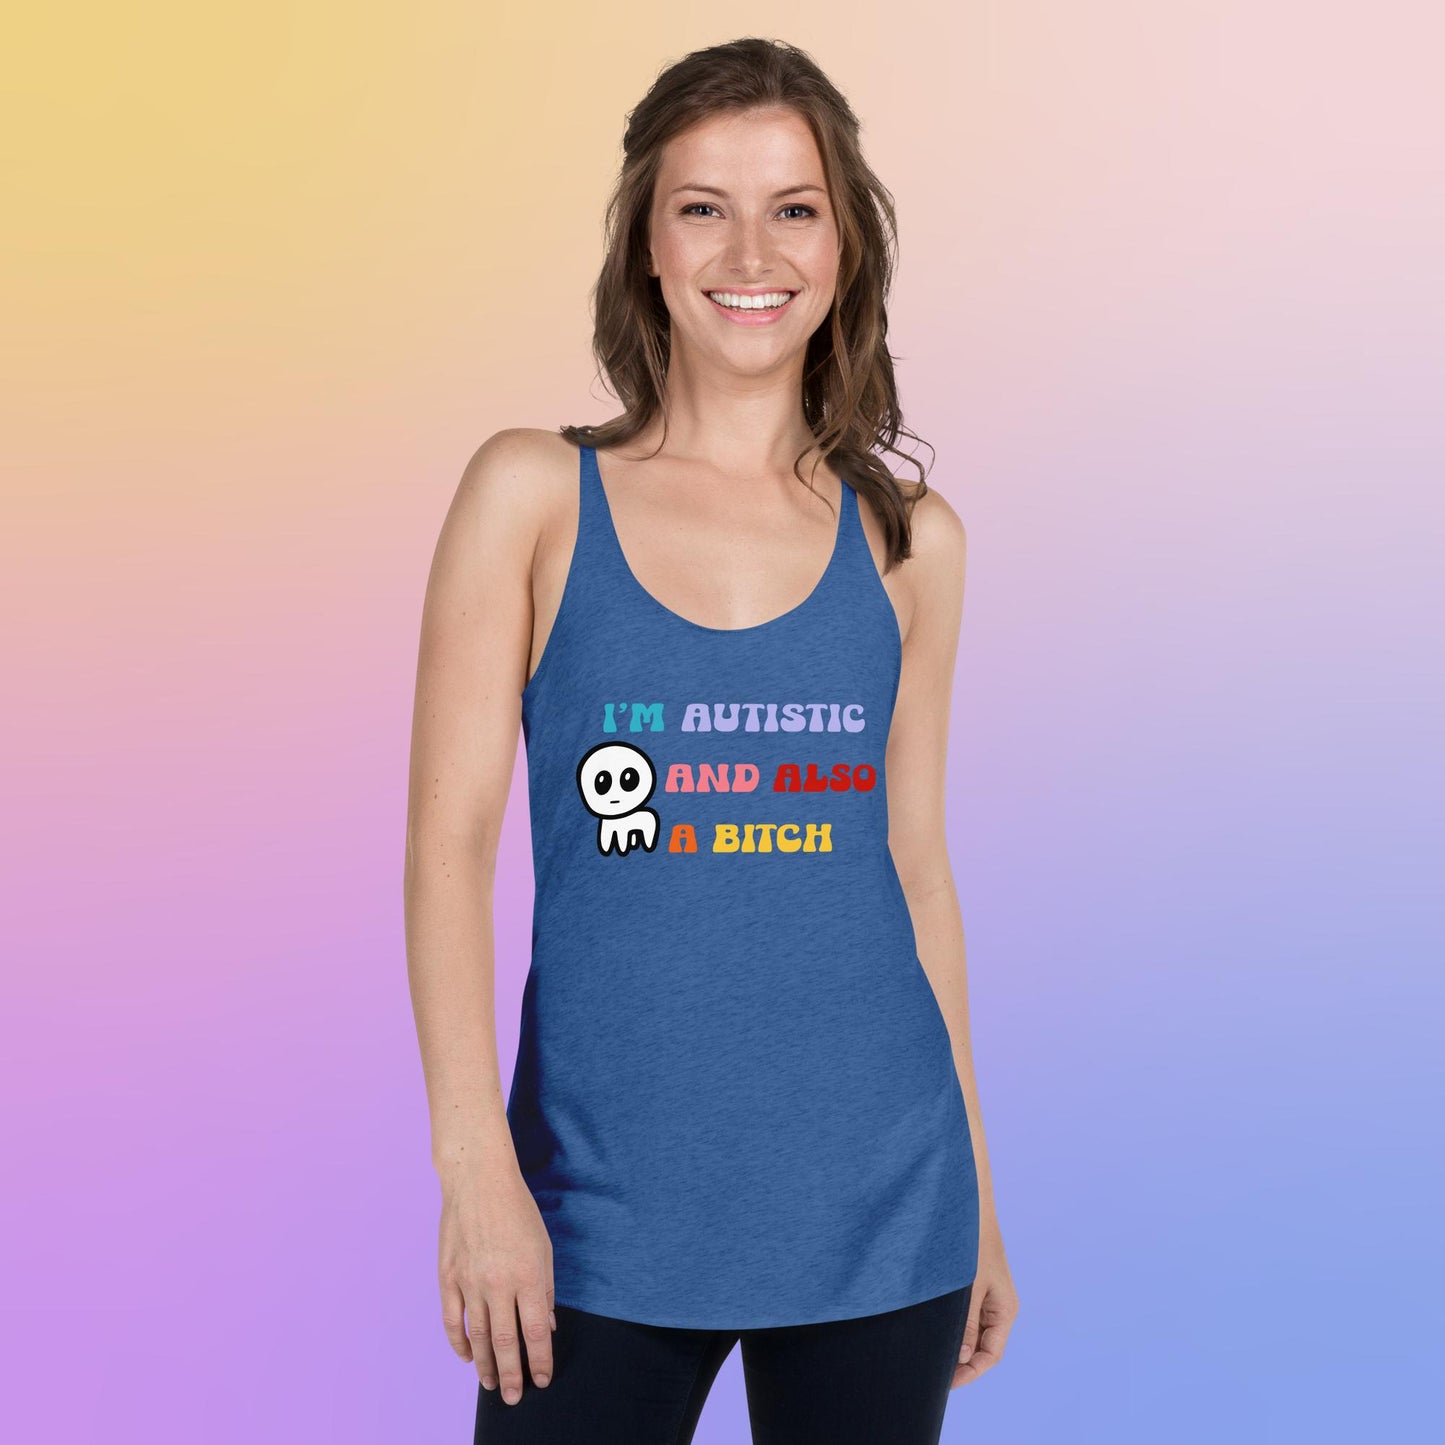 I'm autistic and also a bitch - Women's Racerback Tank